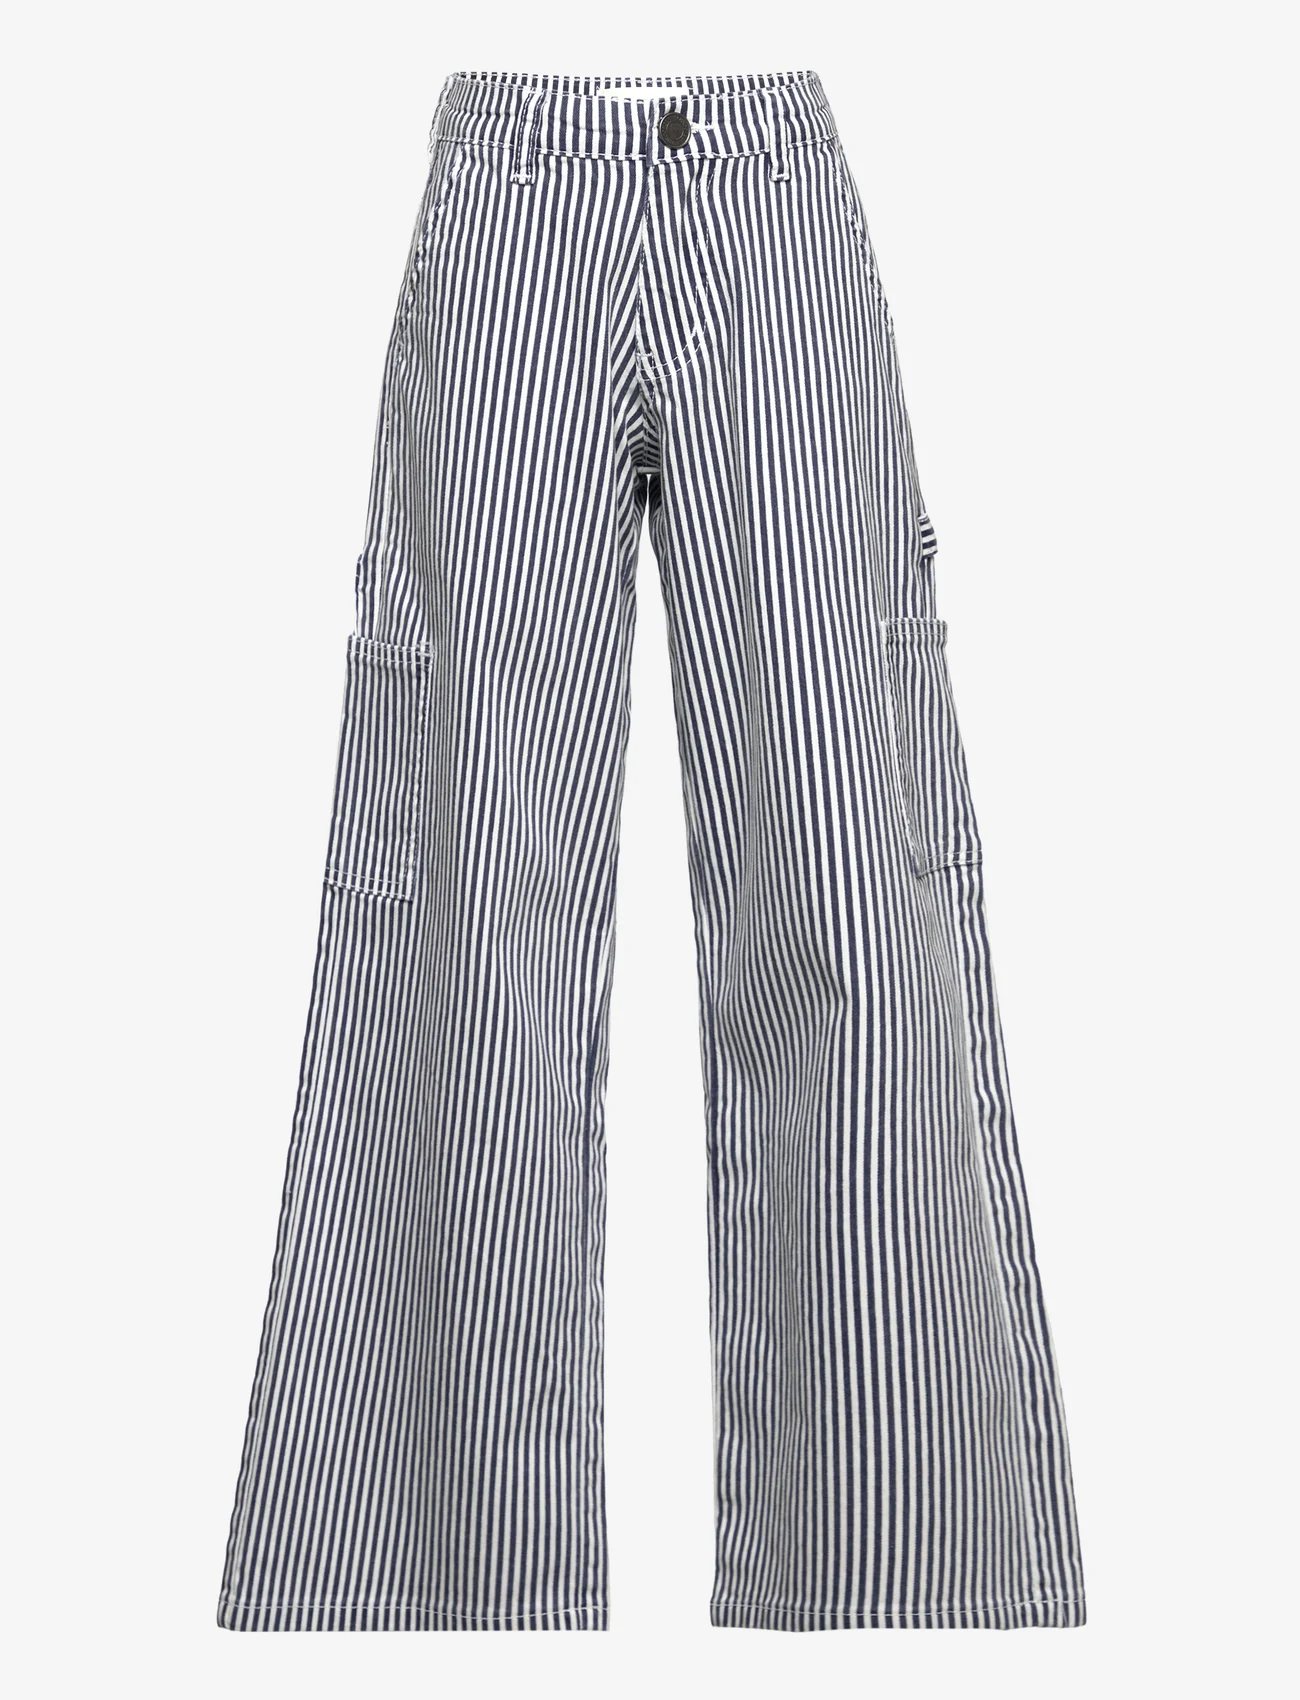 Sofie Schnoor Young - Pants - pantalons - dark blue striped - 0